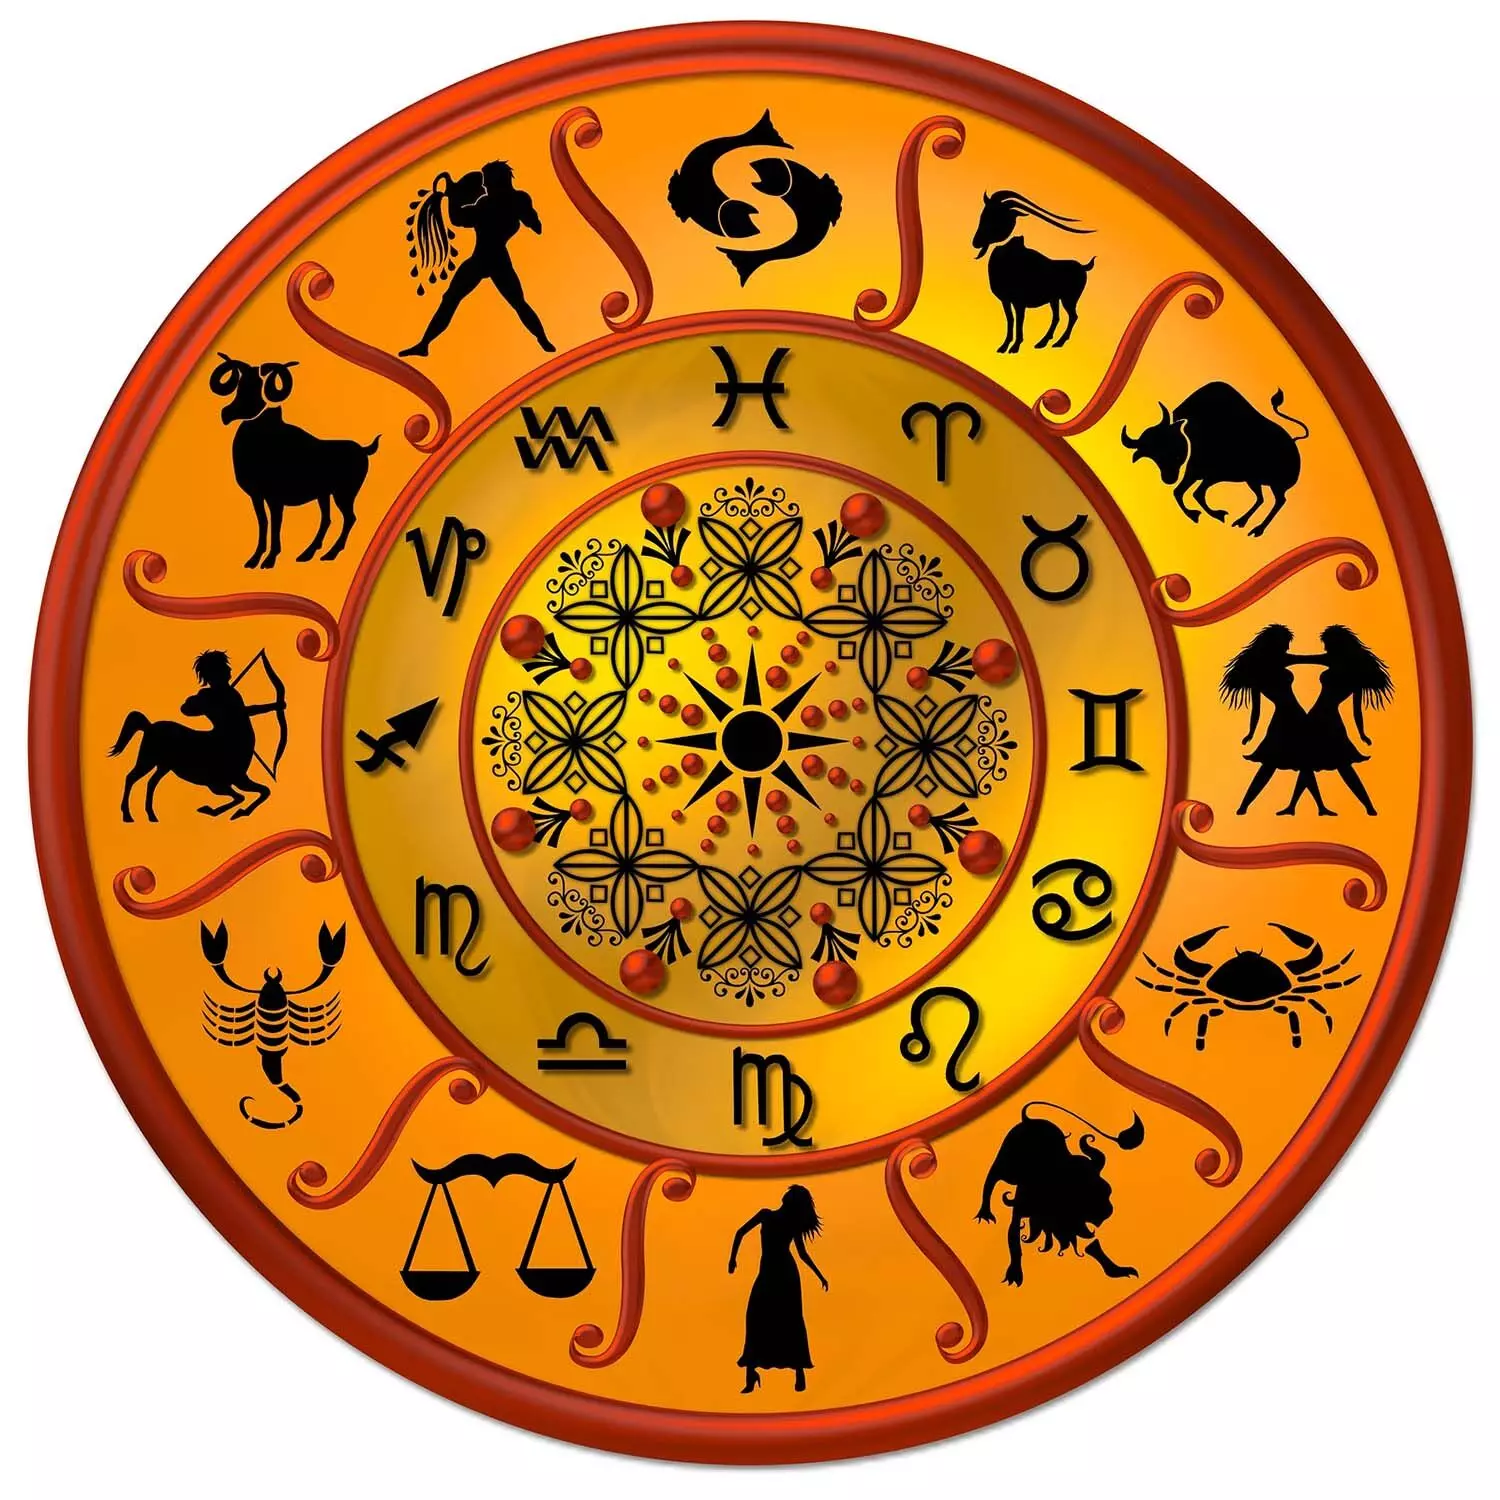 29 June – Know your todays horoscope